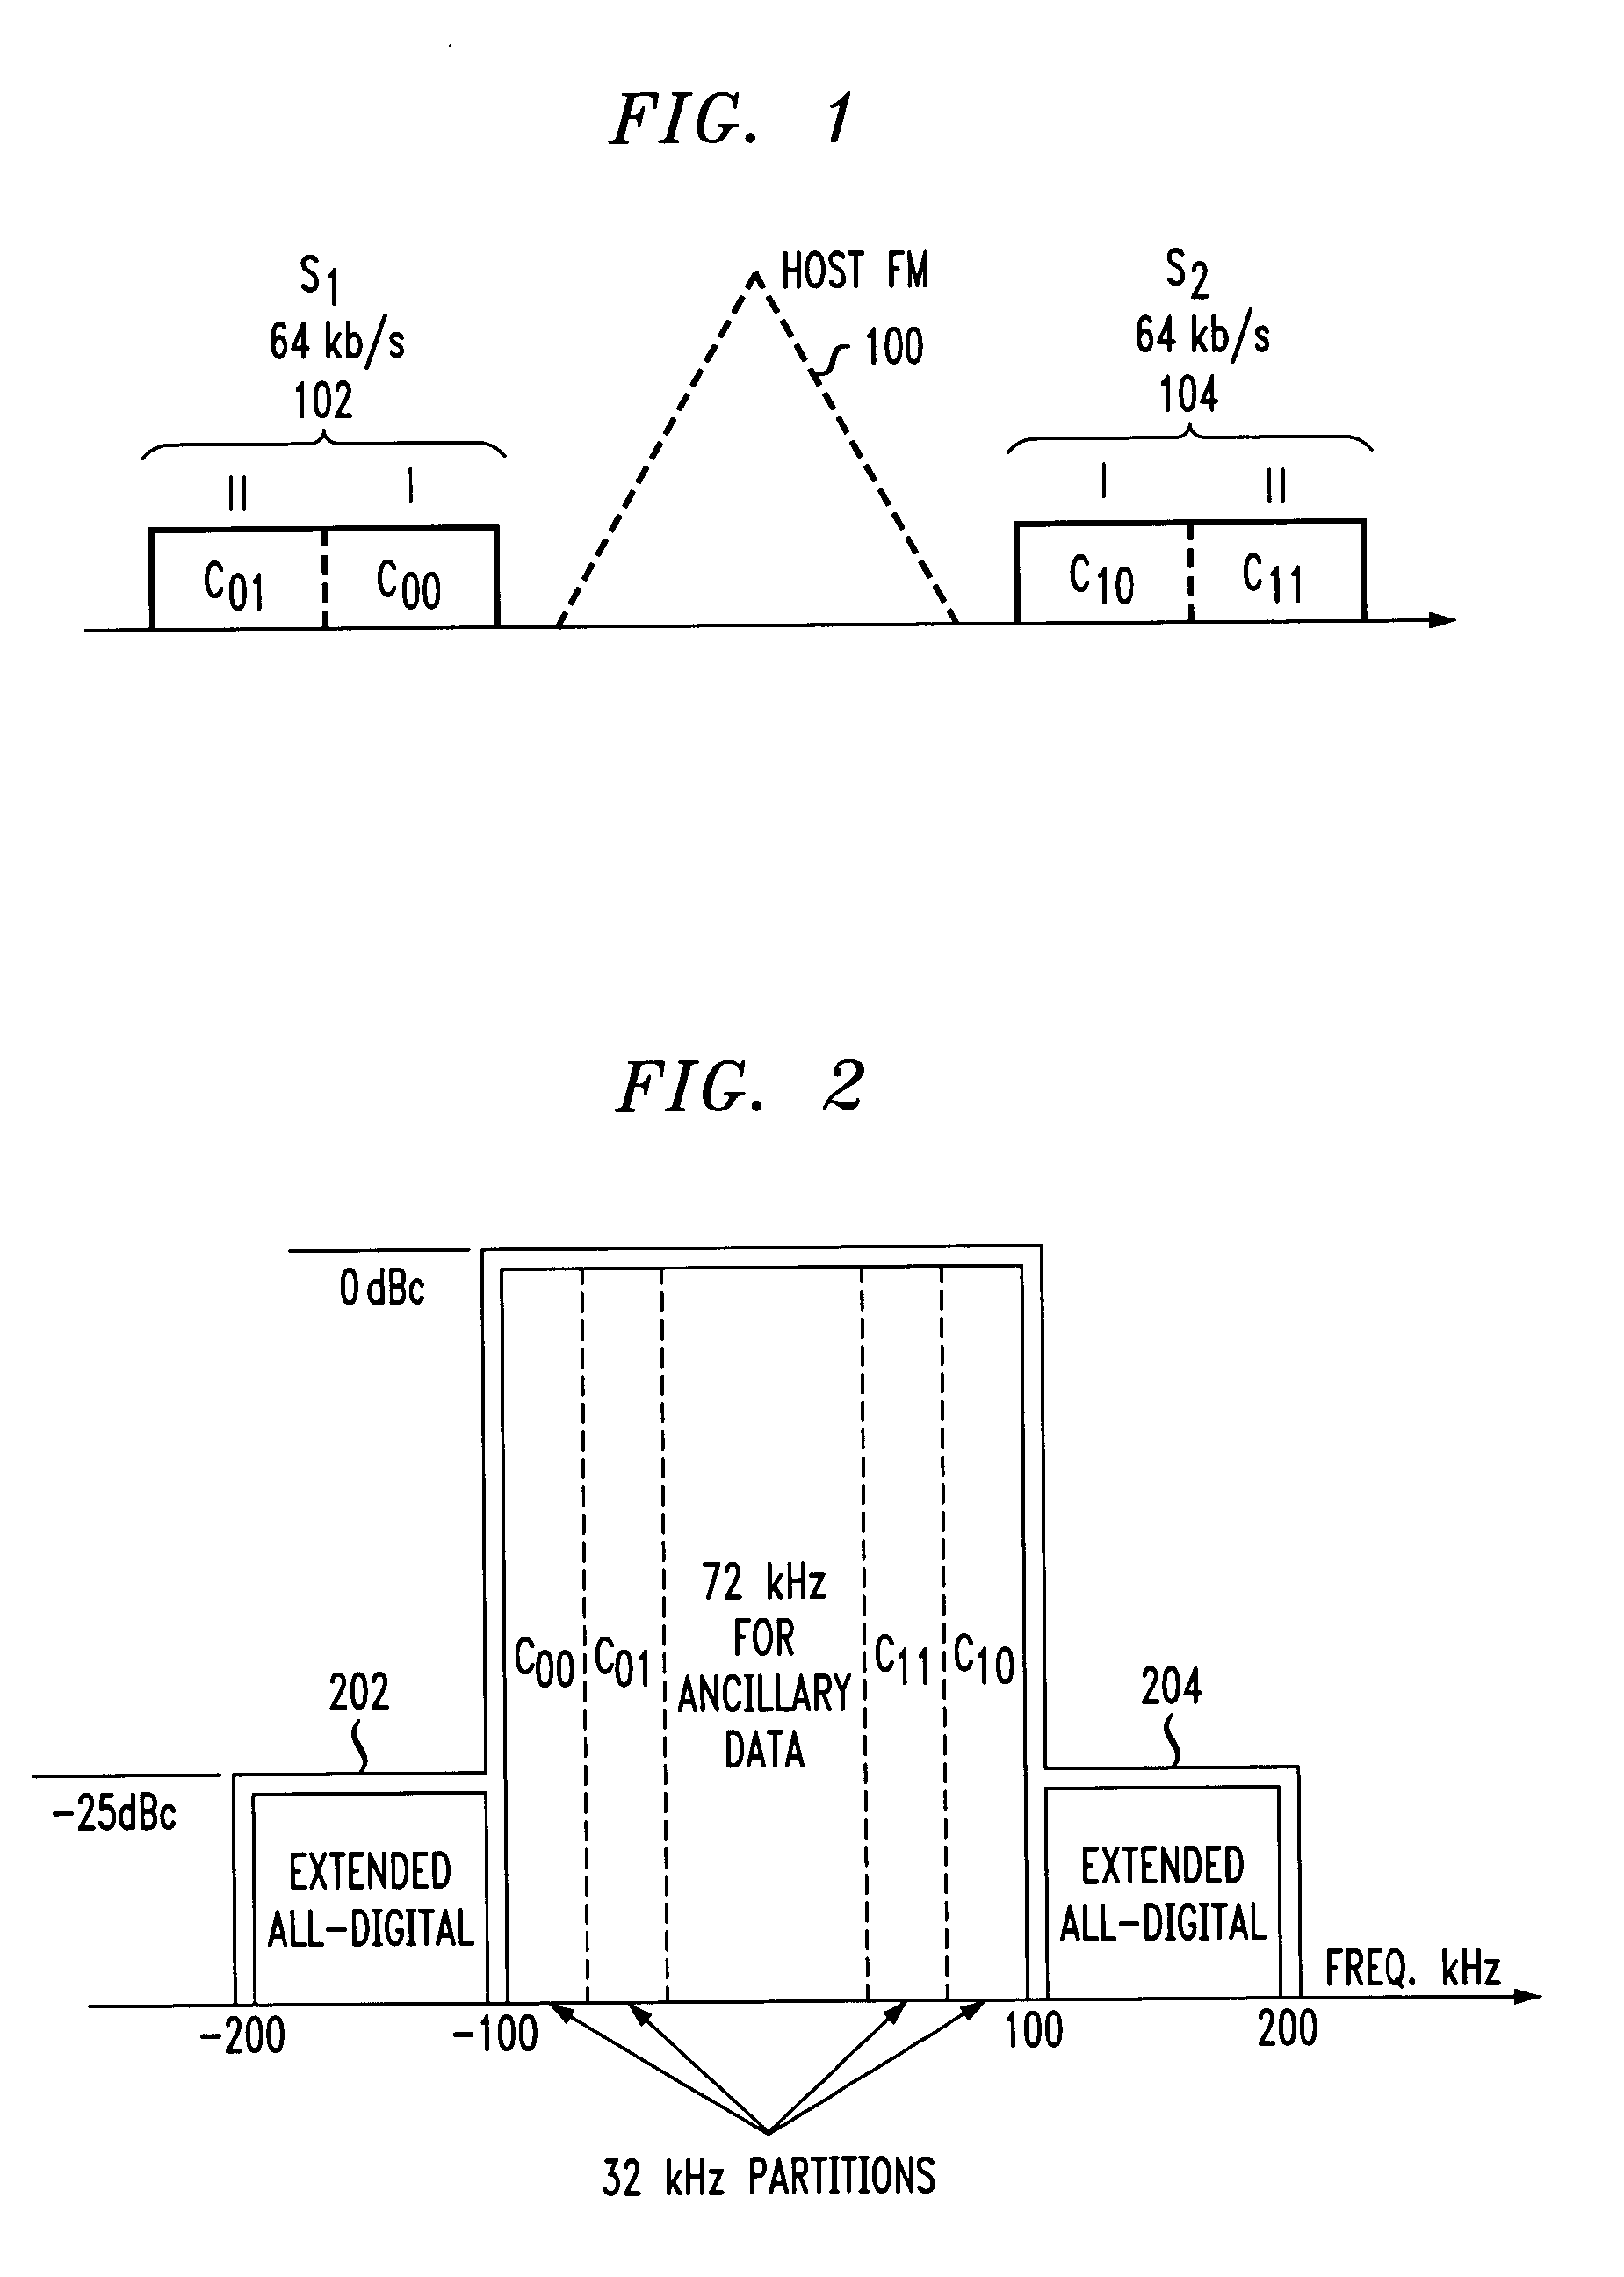 Method and apparatus for multi-stream transmission with time and frequency diversity in an orthogonal frequency division multiplexing (OFDM) communication system